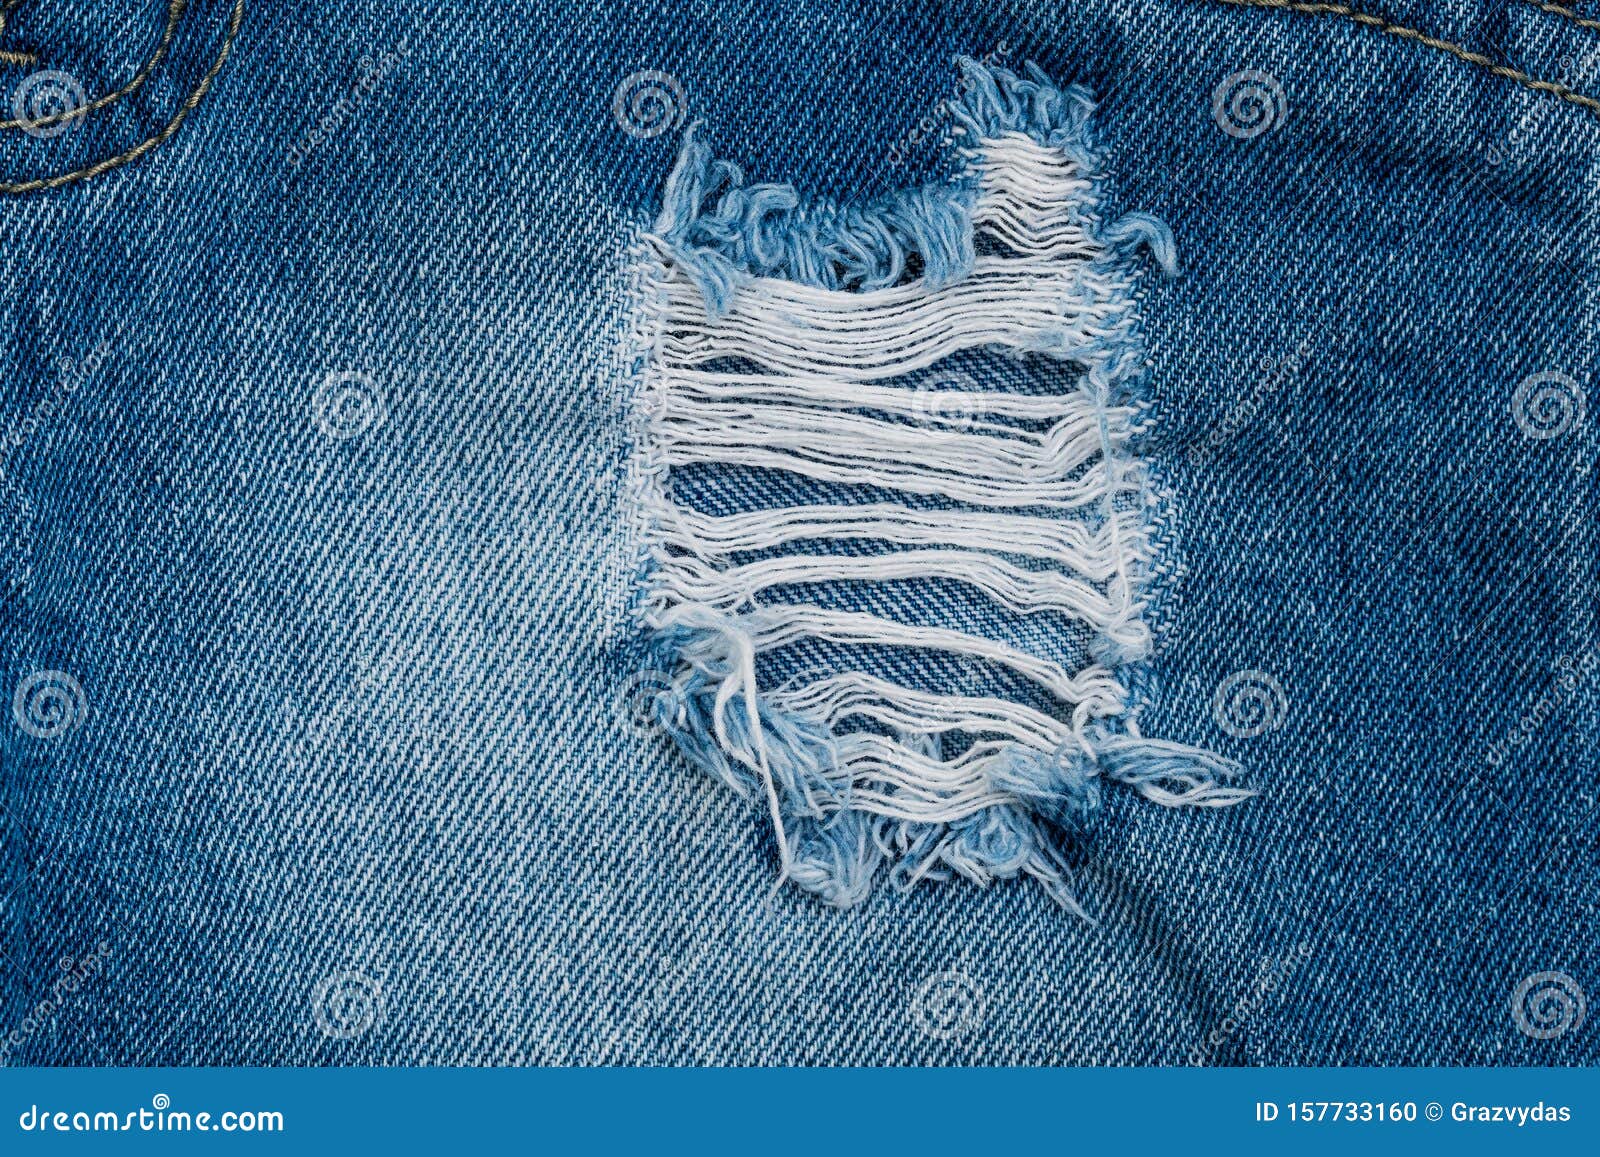 Hole and Threads on Denim Jeans Stock Photo - Image of surface, wear ...